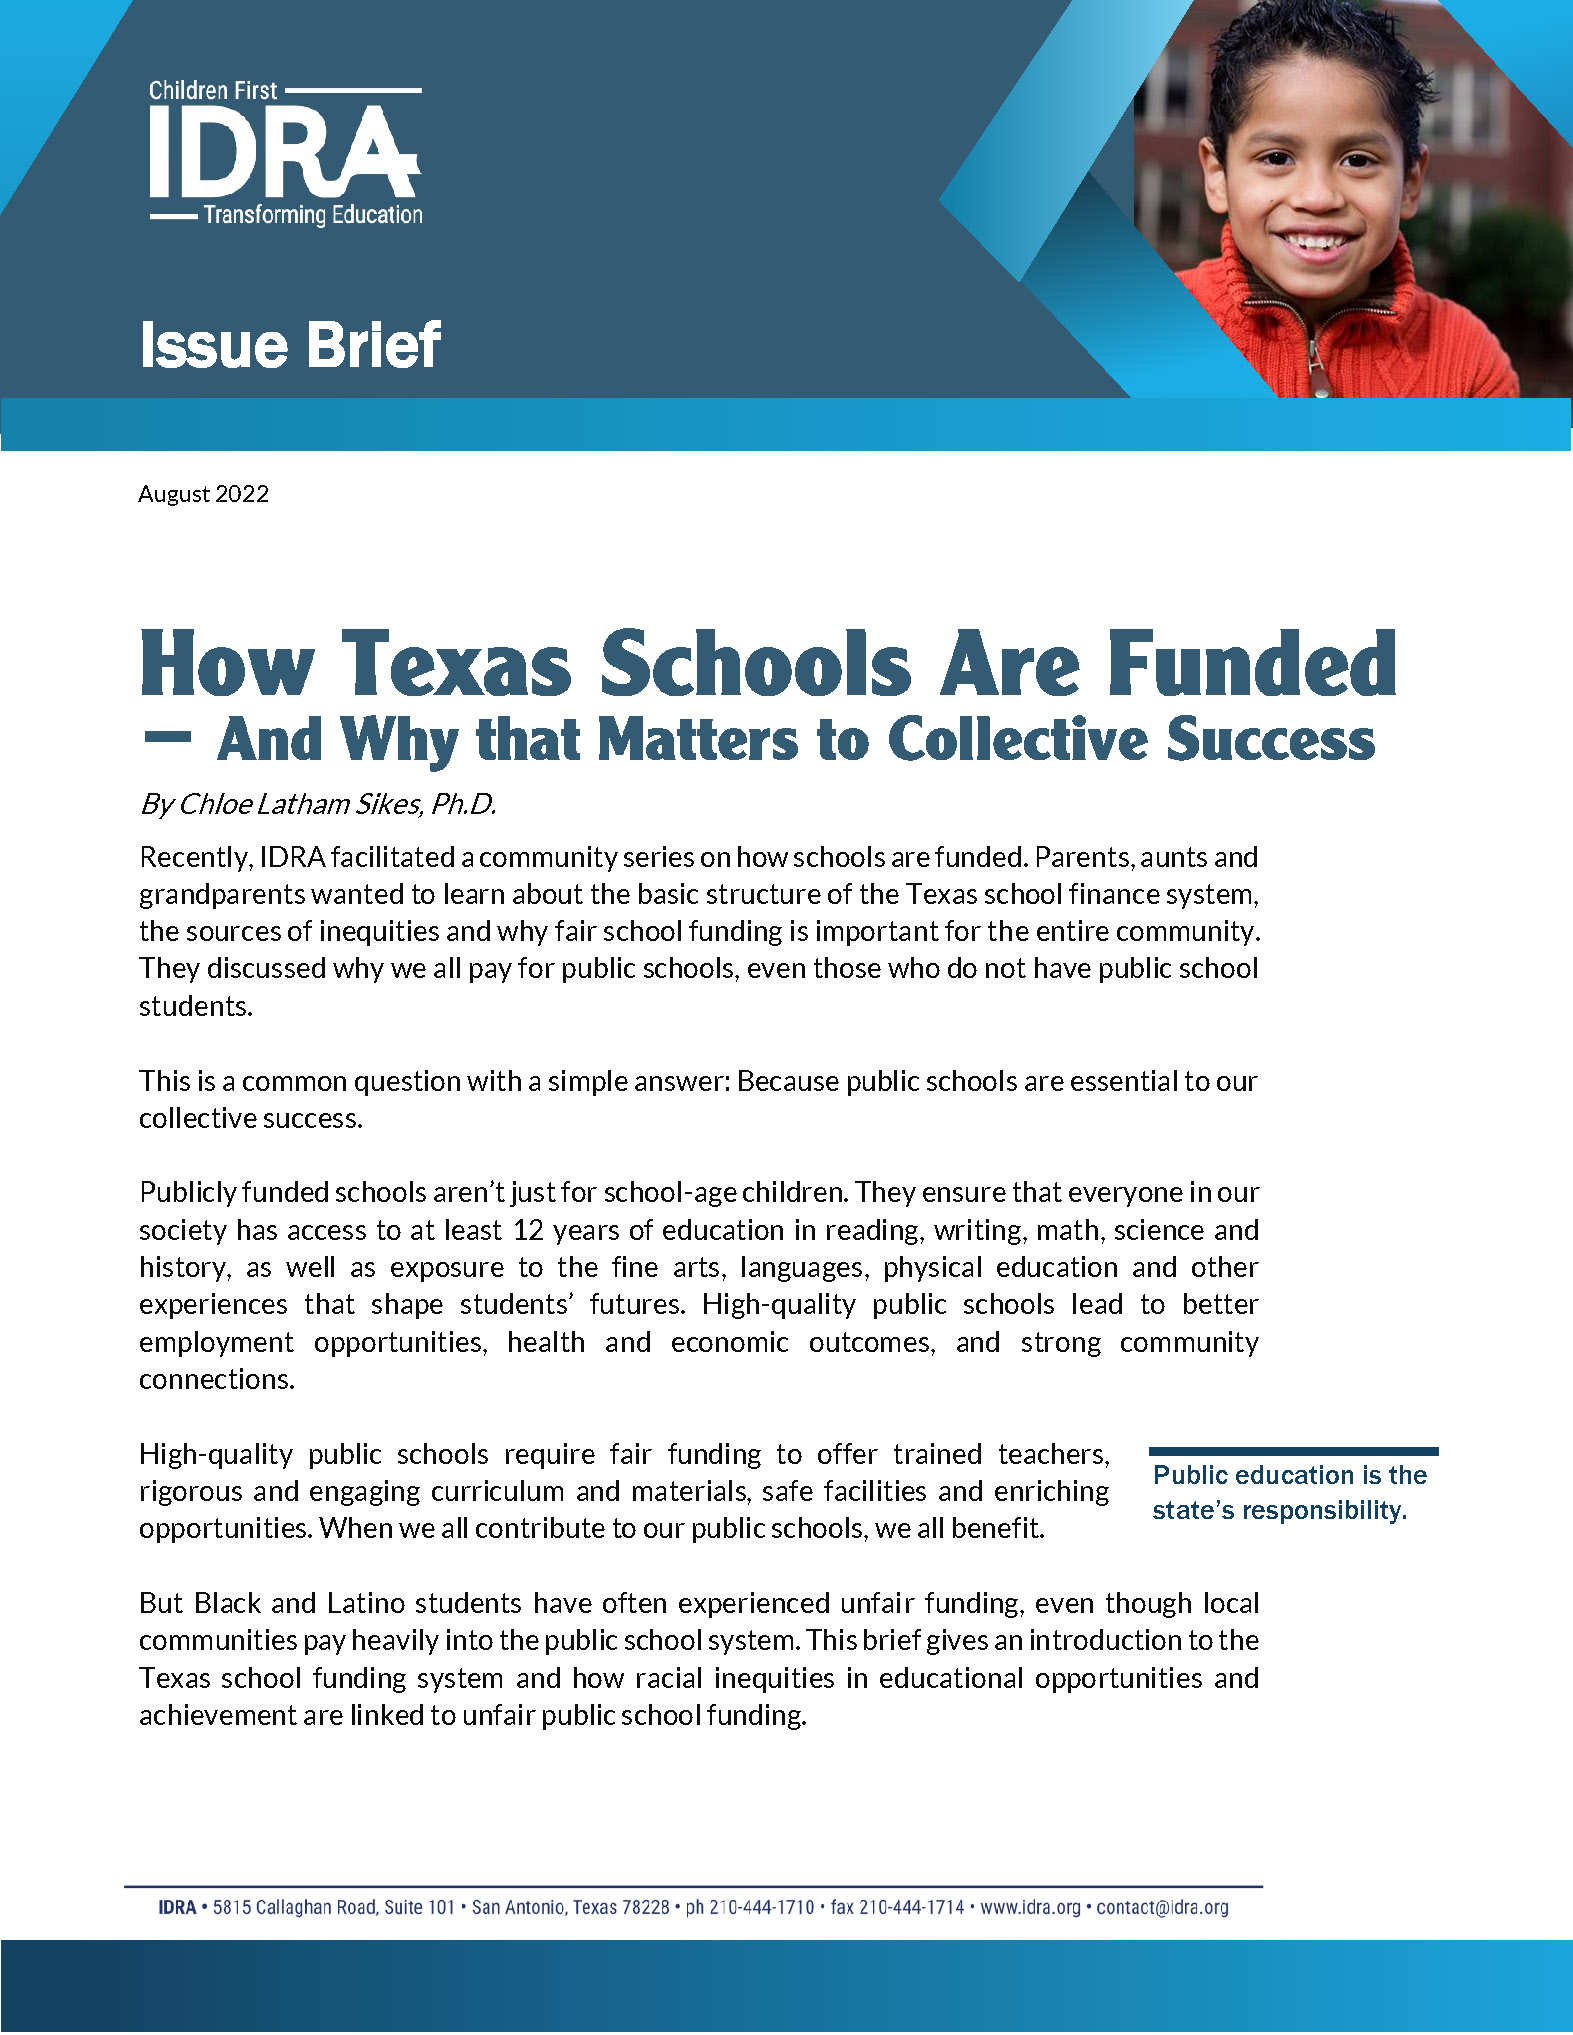 How Texas Schools Are Funded IDRA Issue Brief 2022_Page_1